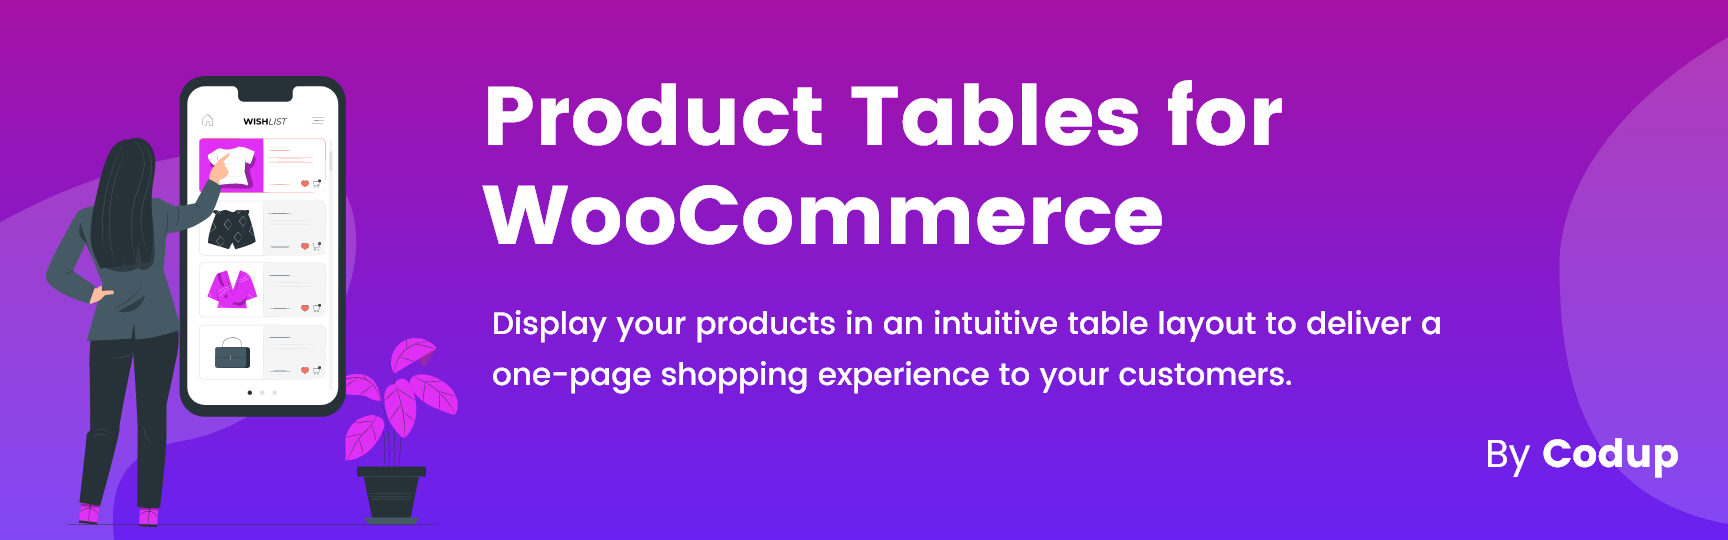 Product-Tables-for-WooCommerce-1-1